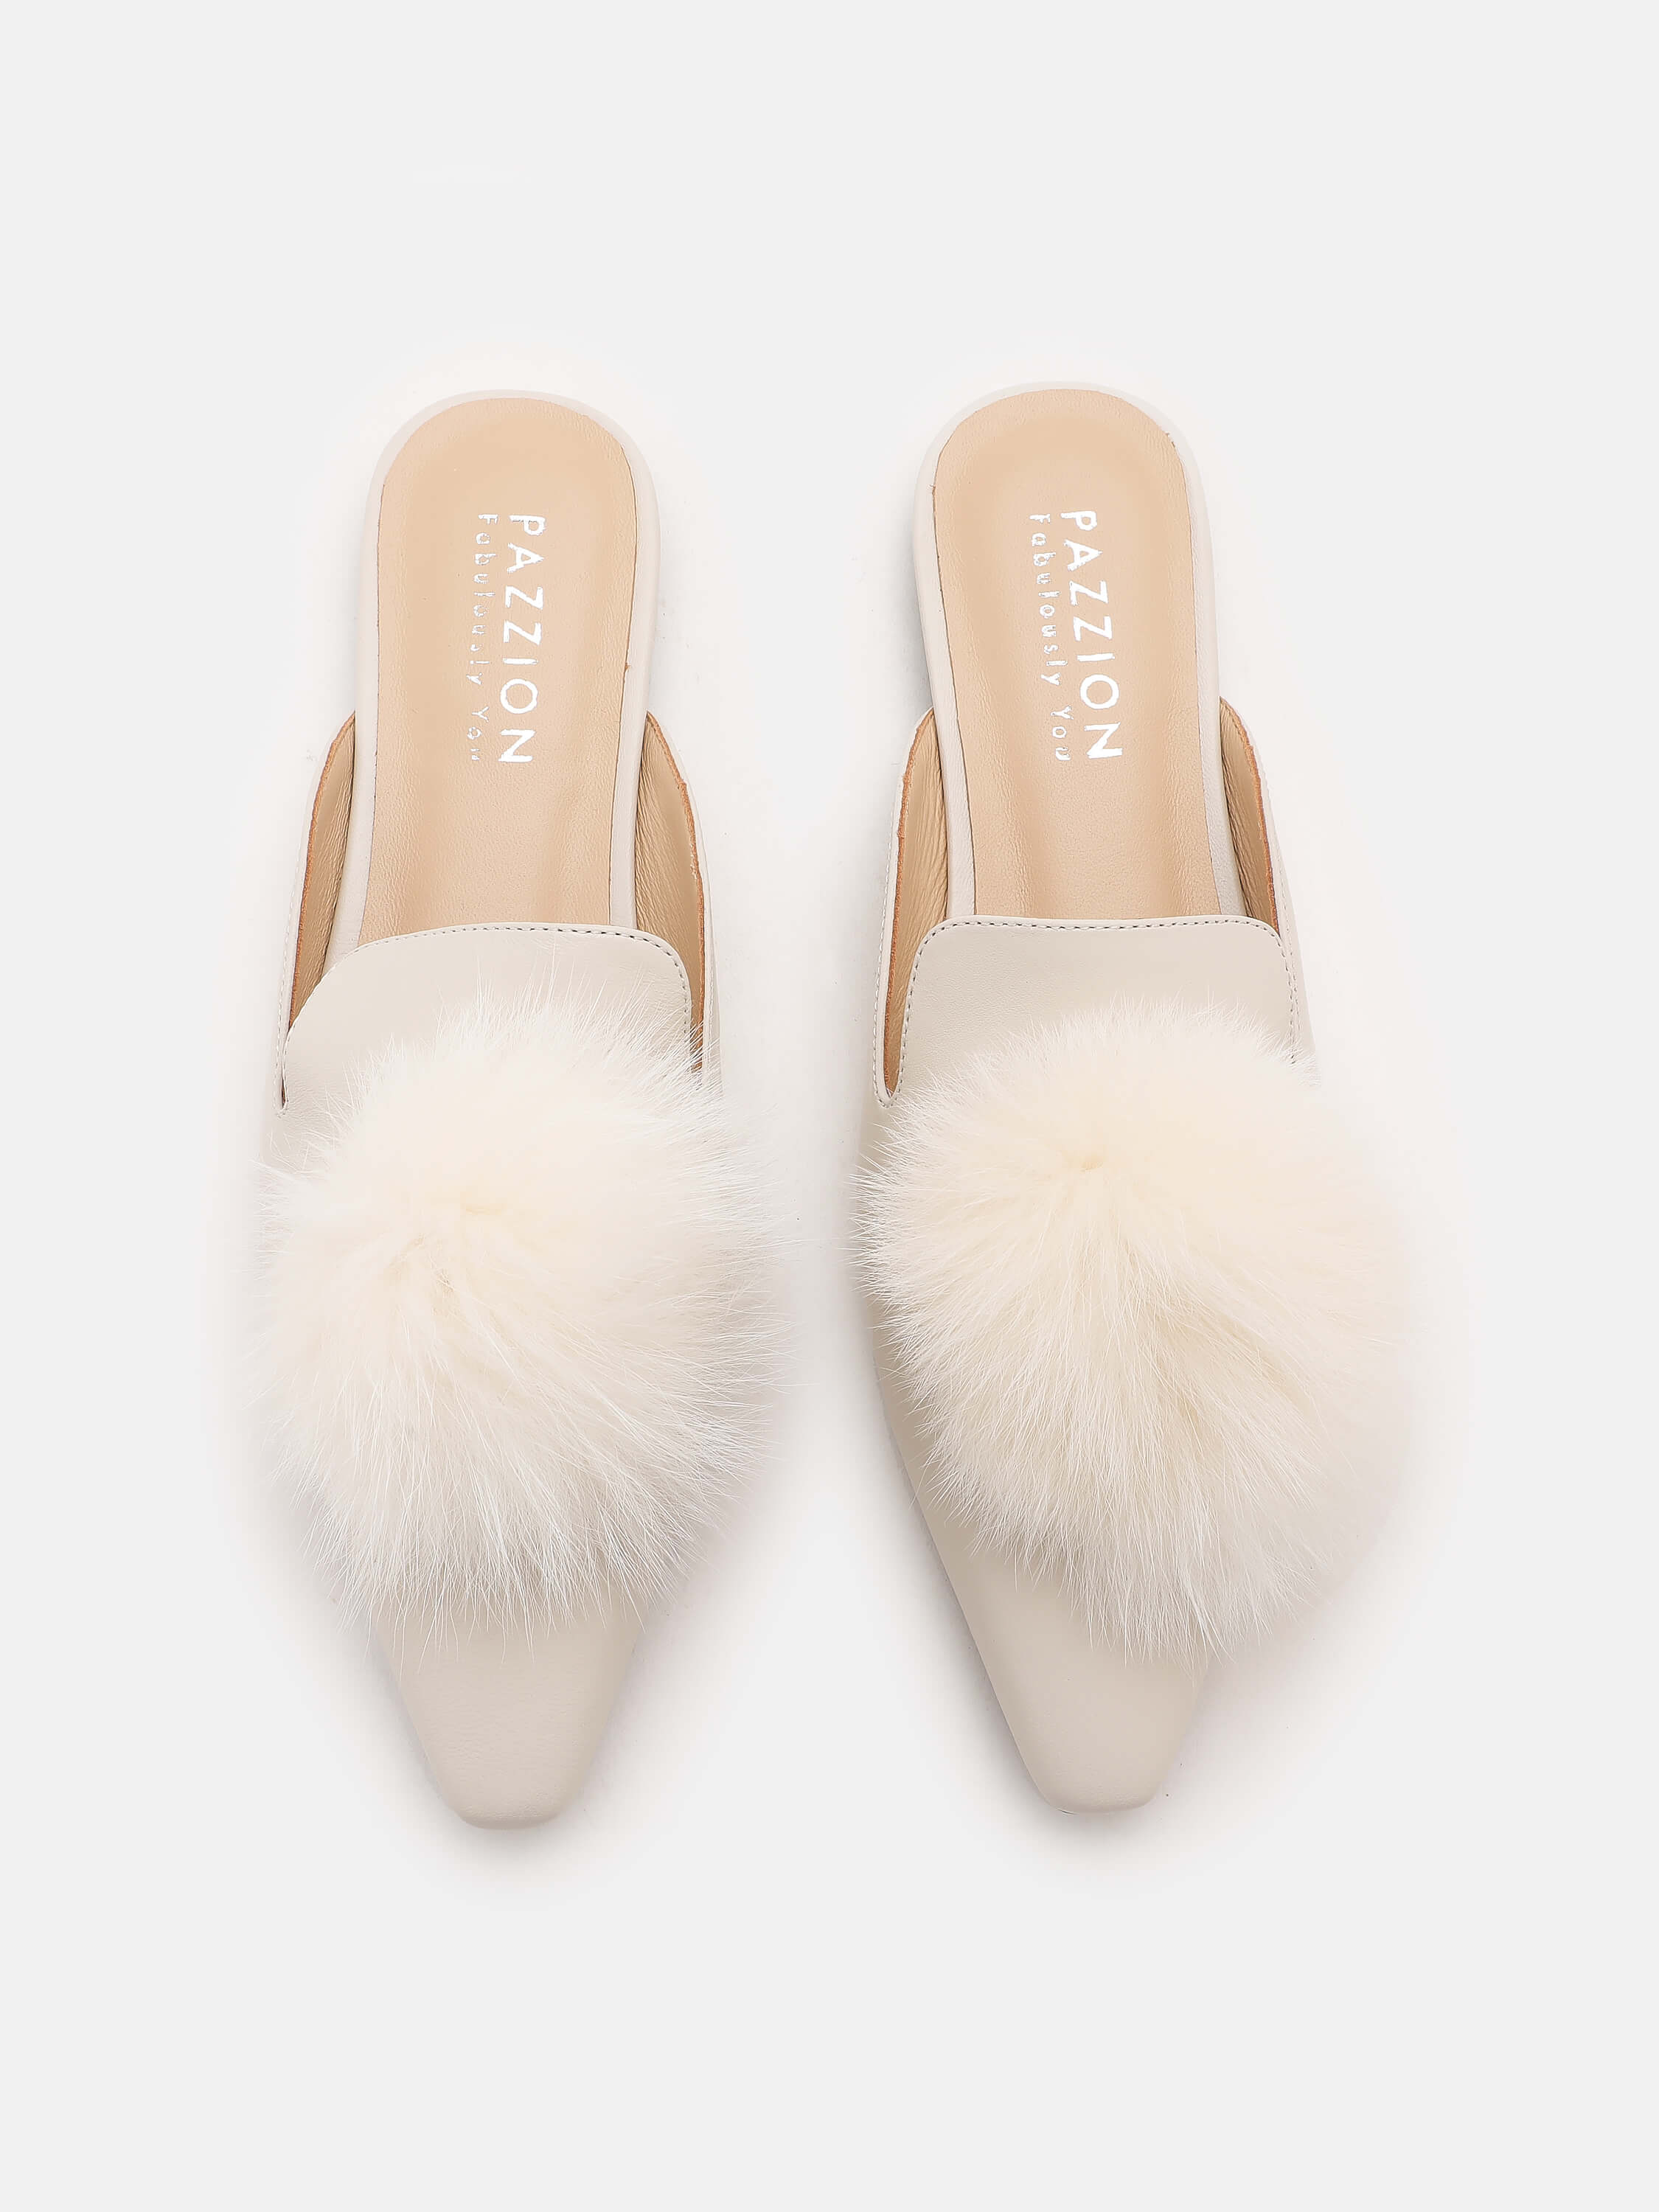 PAZZION, Felicia Loafer Mules, Beige